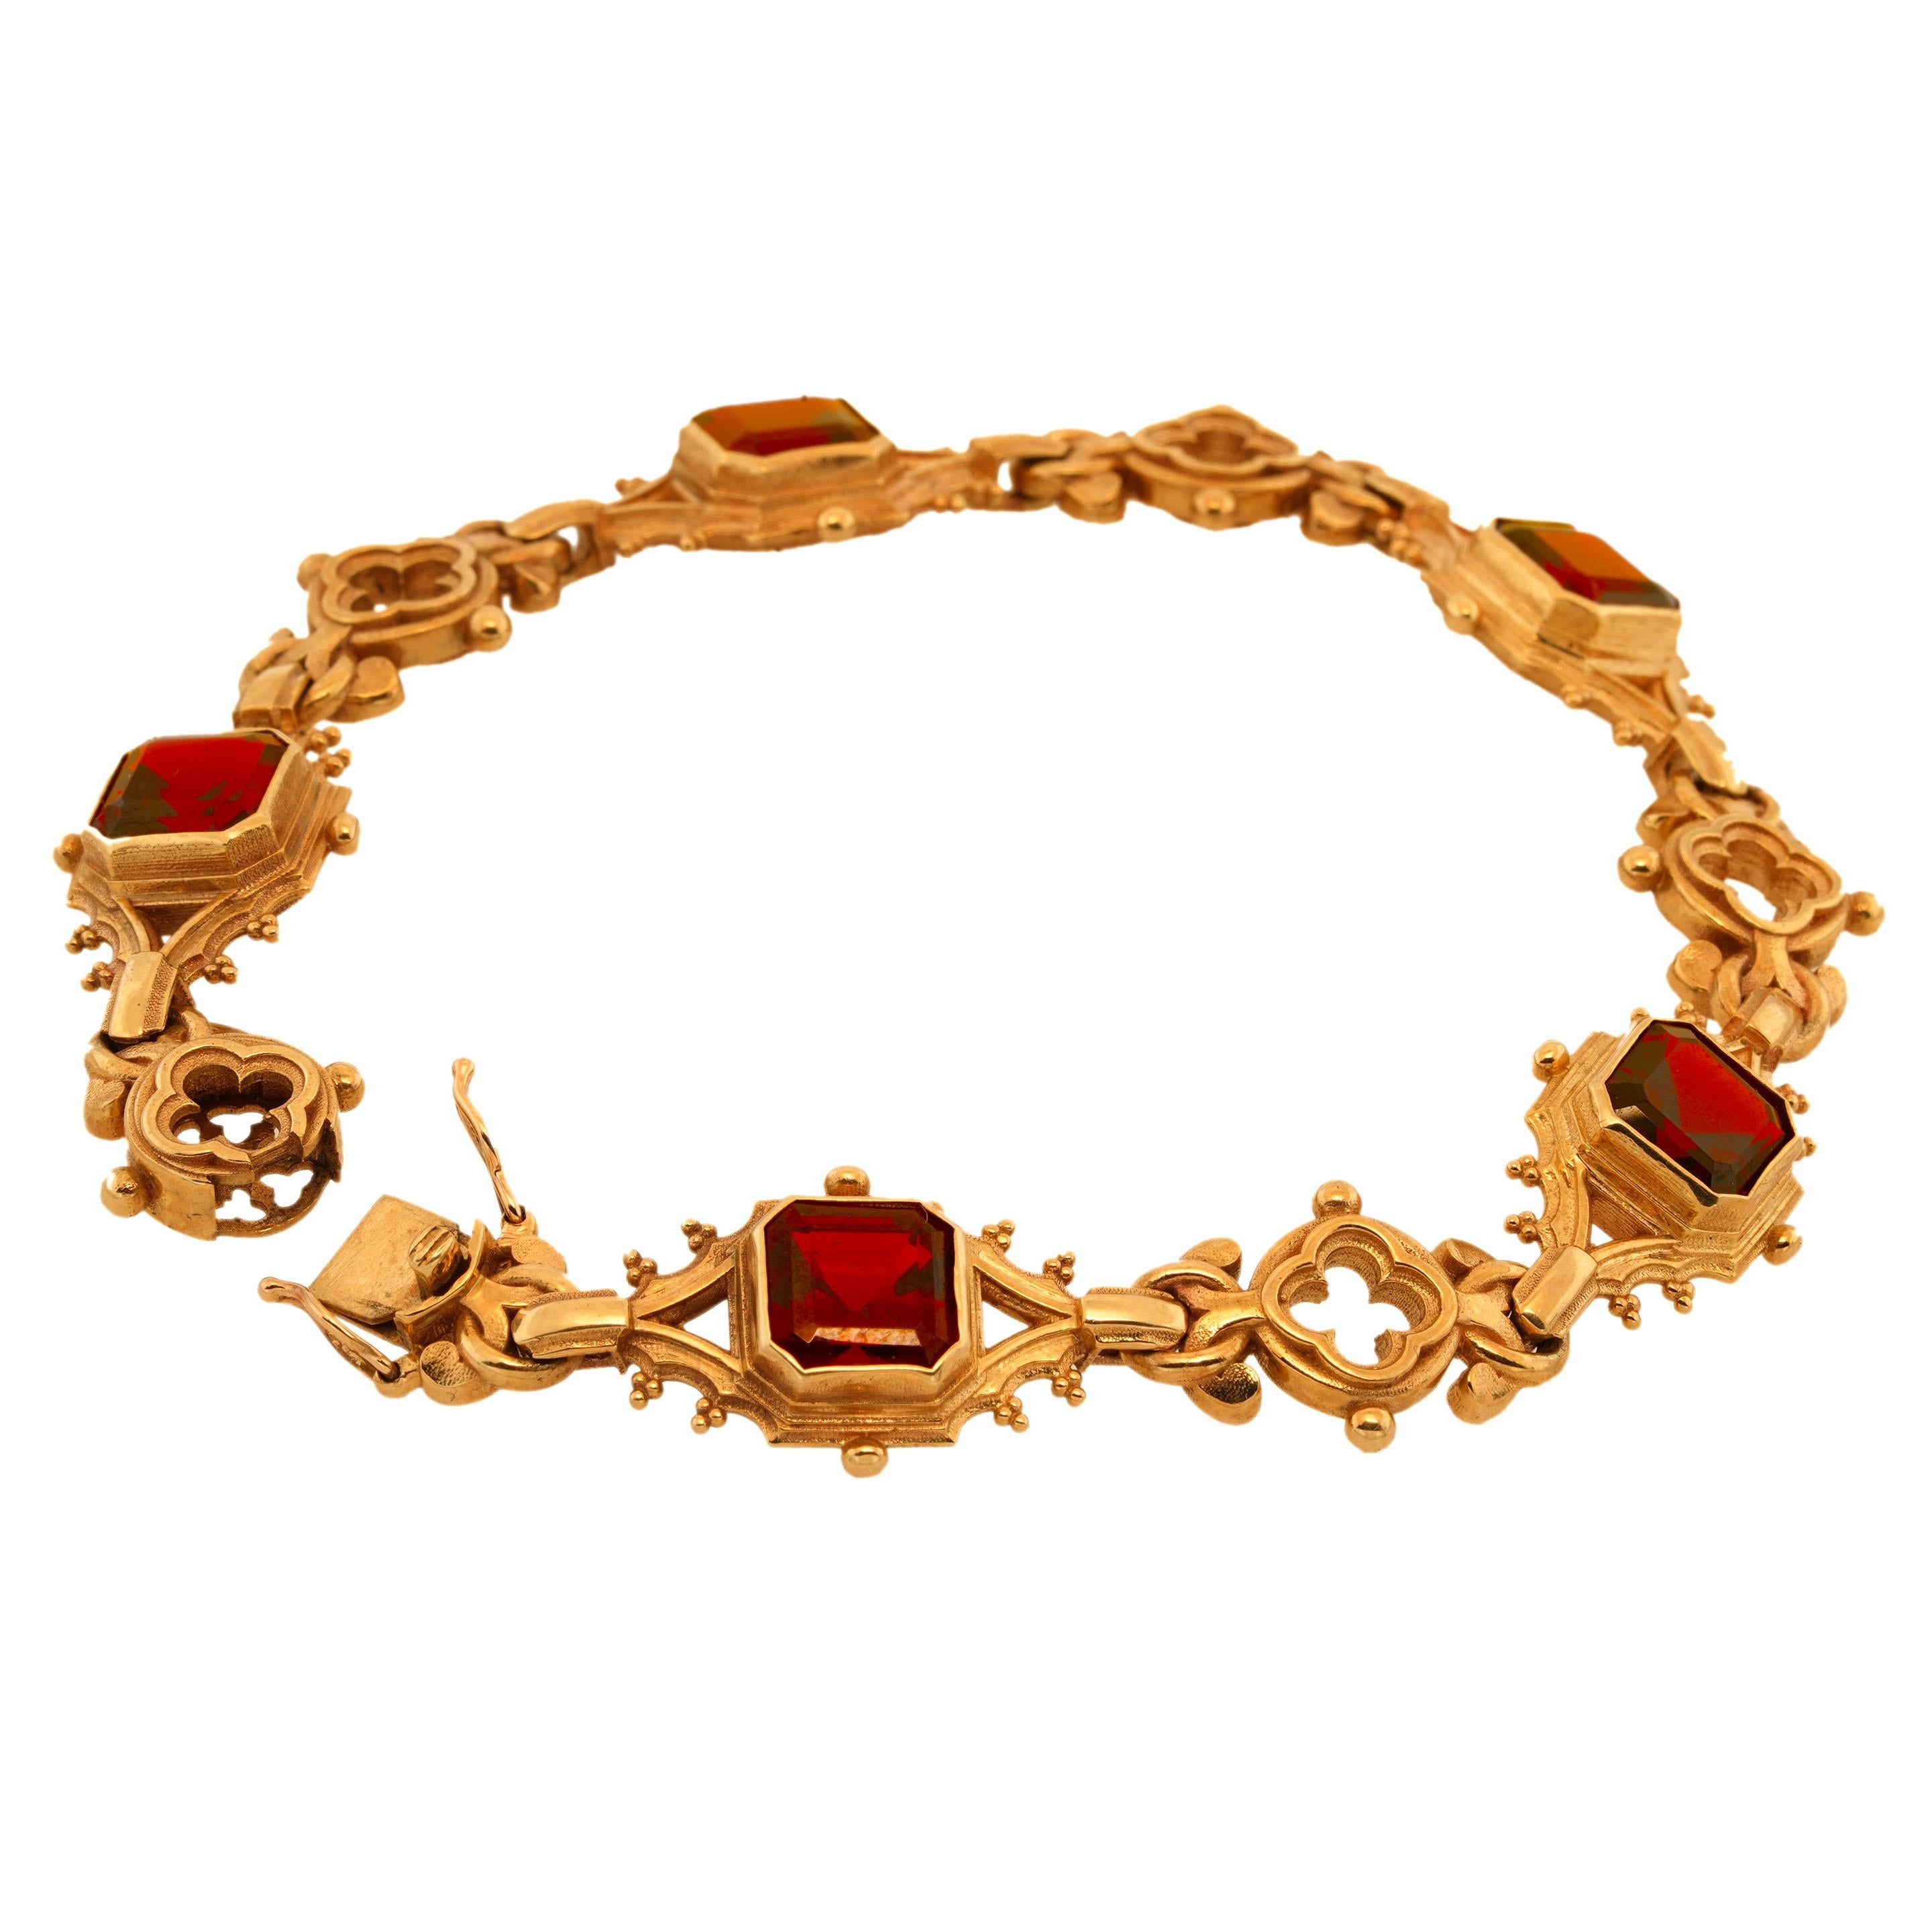 PALAZZO DUCALE GOTHIC GARNET LINK BRACELET

Masterfully handcrafted in 9kt yellow gold this exquisite gothic inspired link bracelet is a feast for the eyes. It features five mesmerizing deep scarlet 8mm x 8mm Asscher cut garnets housed in the most